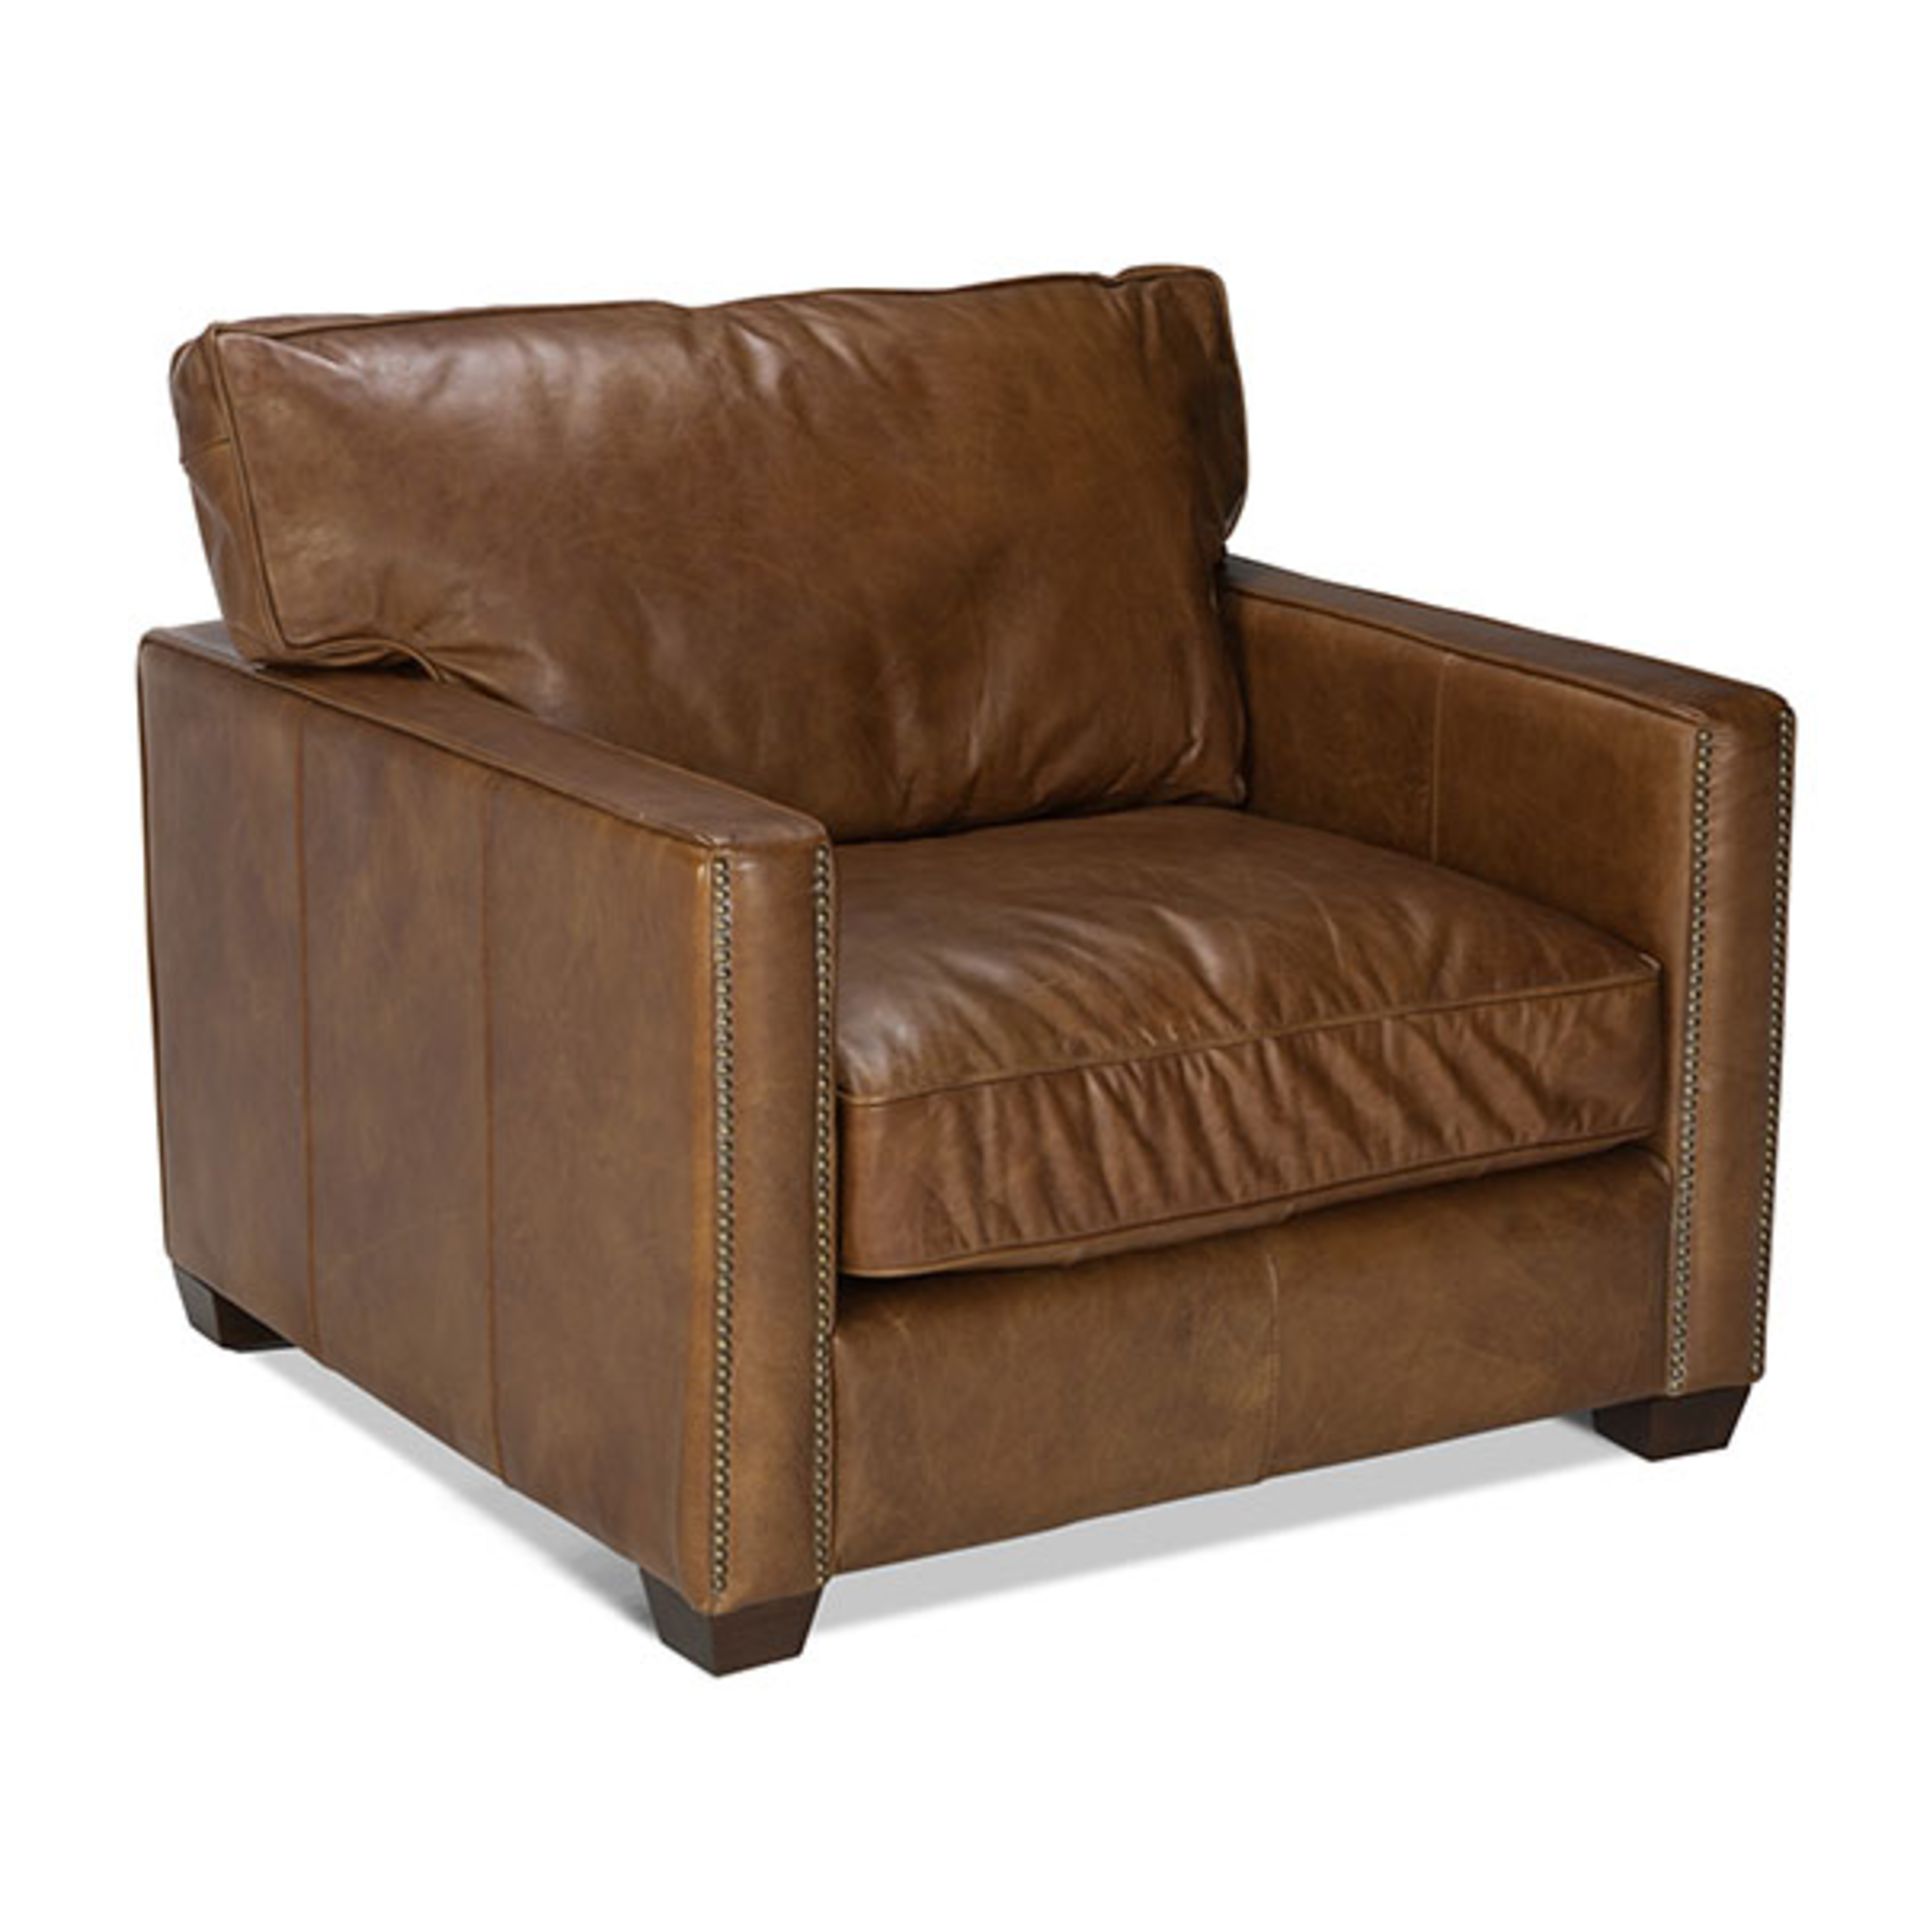 Viscount William Sofa Single Seater Its Strong Rectangular Shape Is Softened With The Elegant - Image 2 of 2